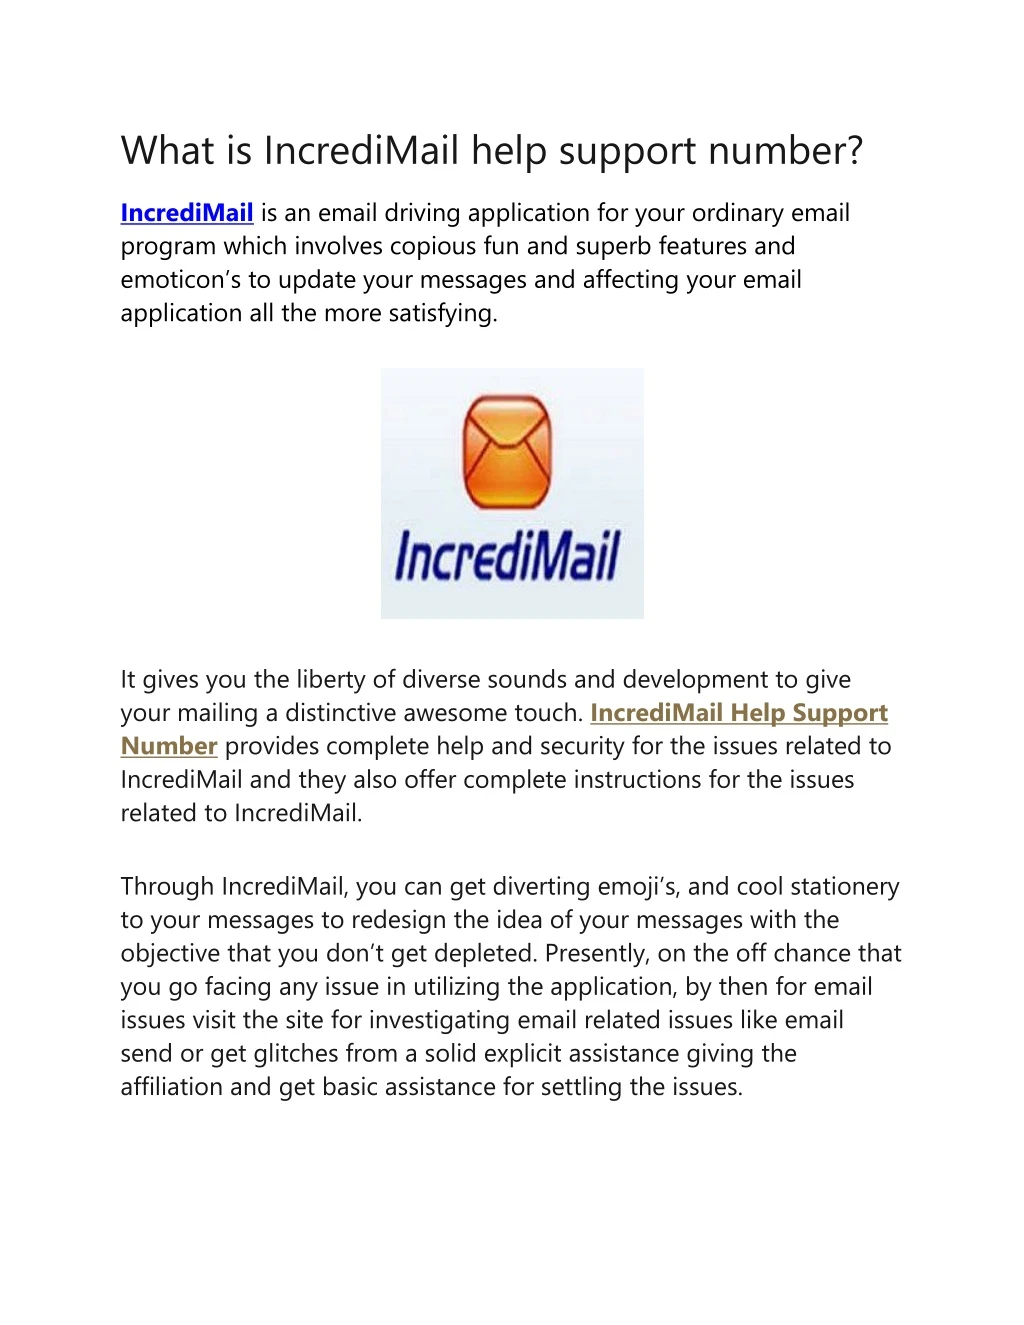 what is incredimail help support number